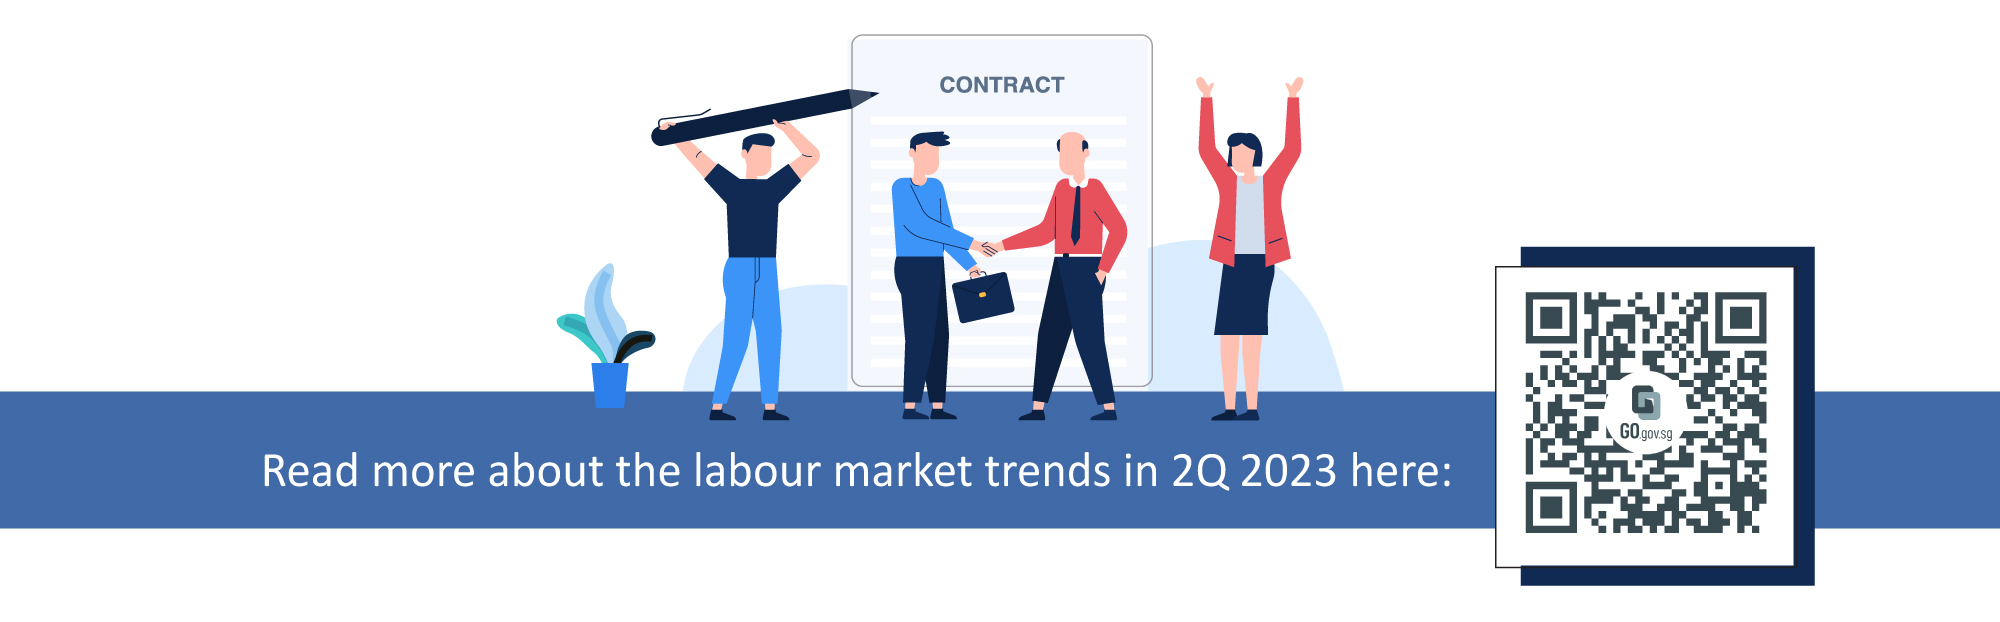 Read more about the labour market trends in 2Q 2023